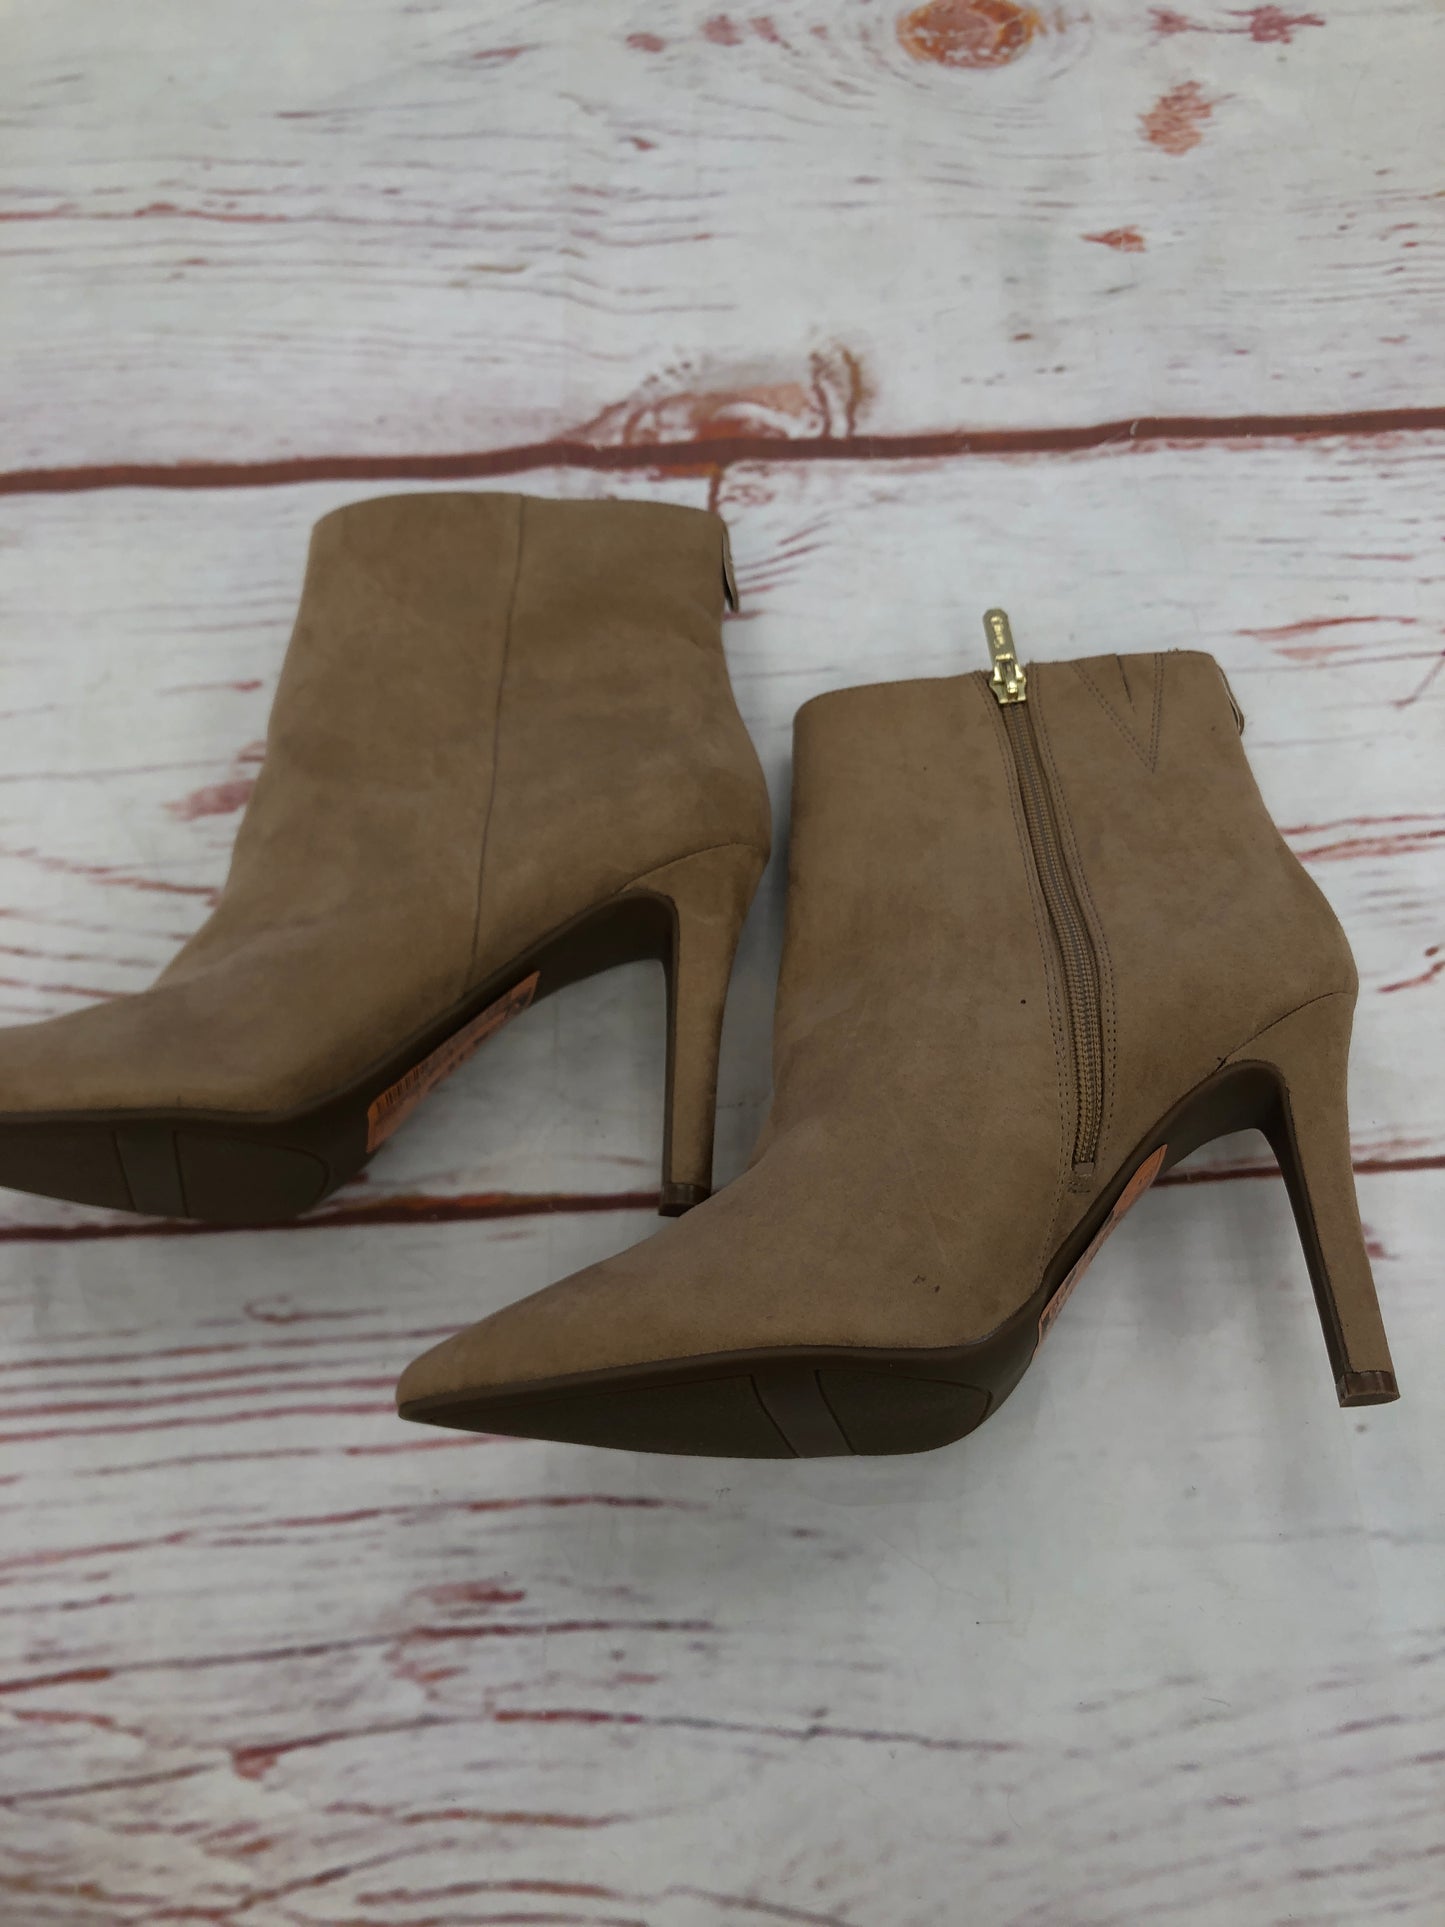 Shoes Heels Stiletto By Circus By Sam Edelman  Size: 8